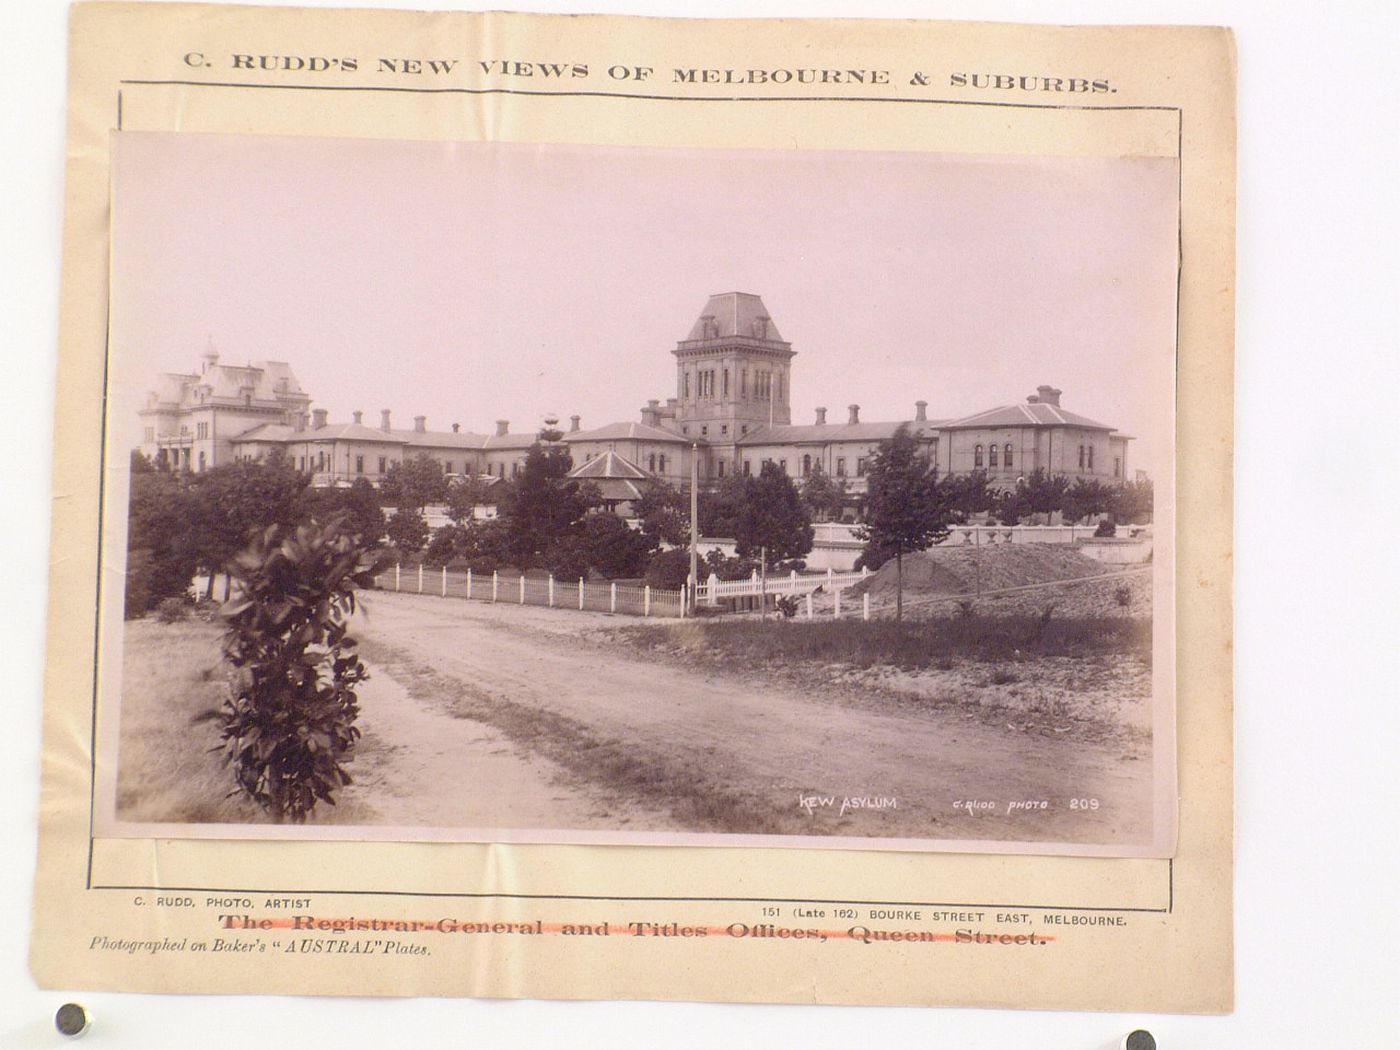 Distant view of Kew Asylum (now Willsmere Hospital) showing the grounds, Melbourne, Australia